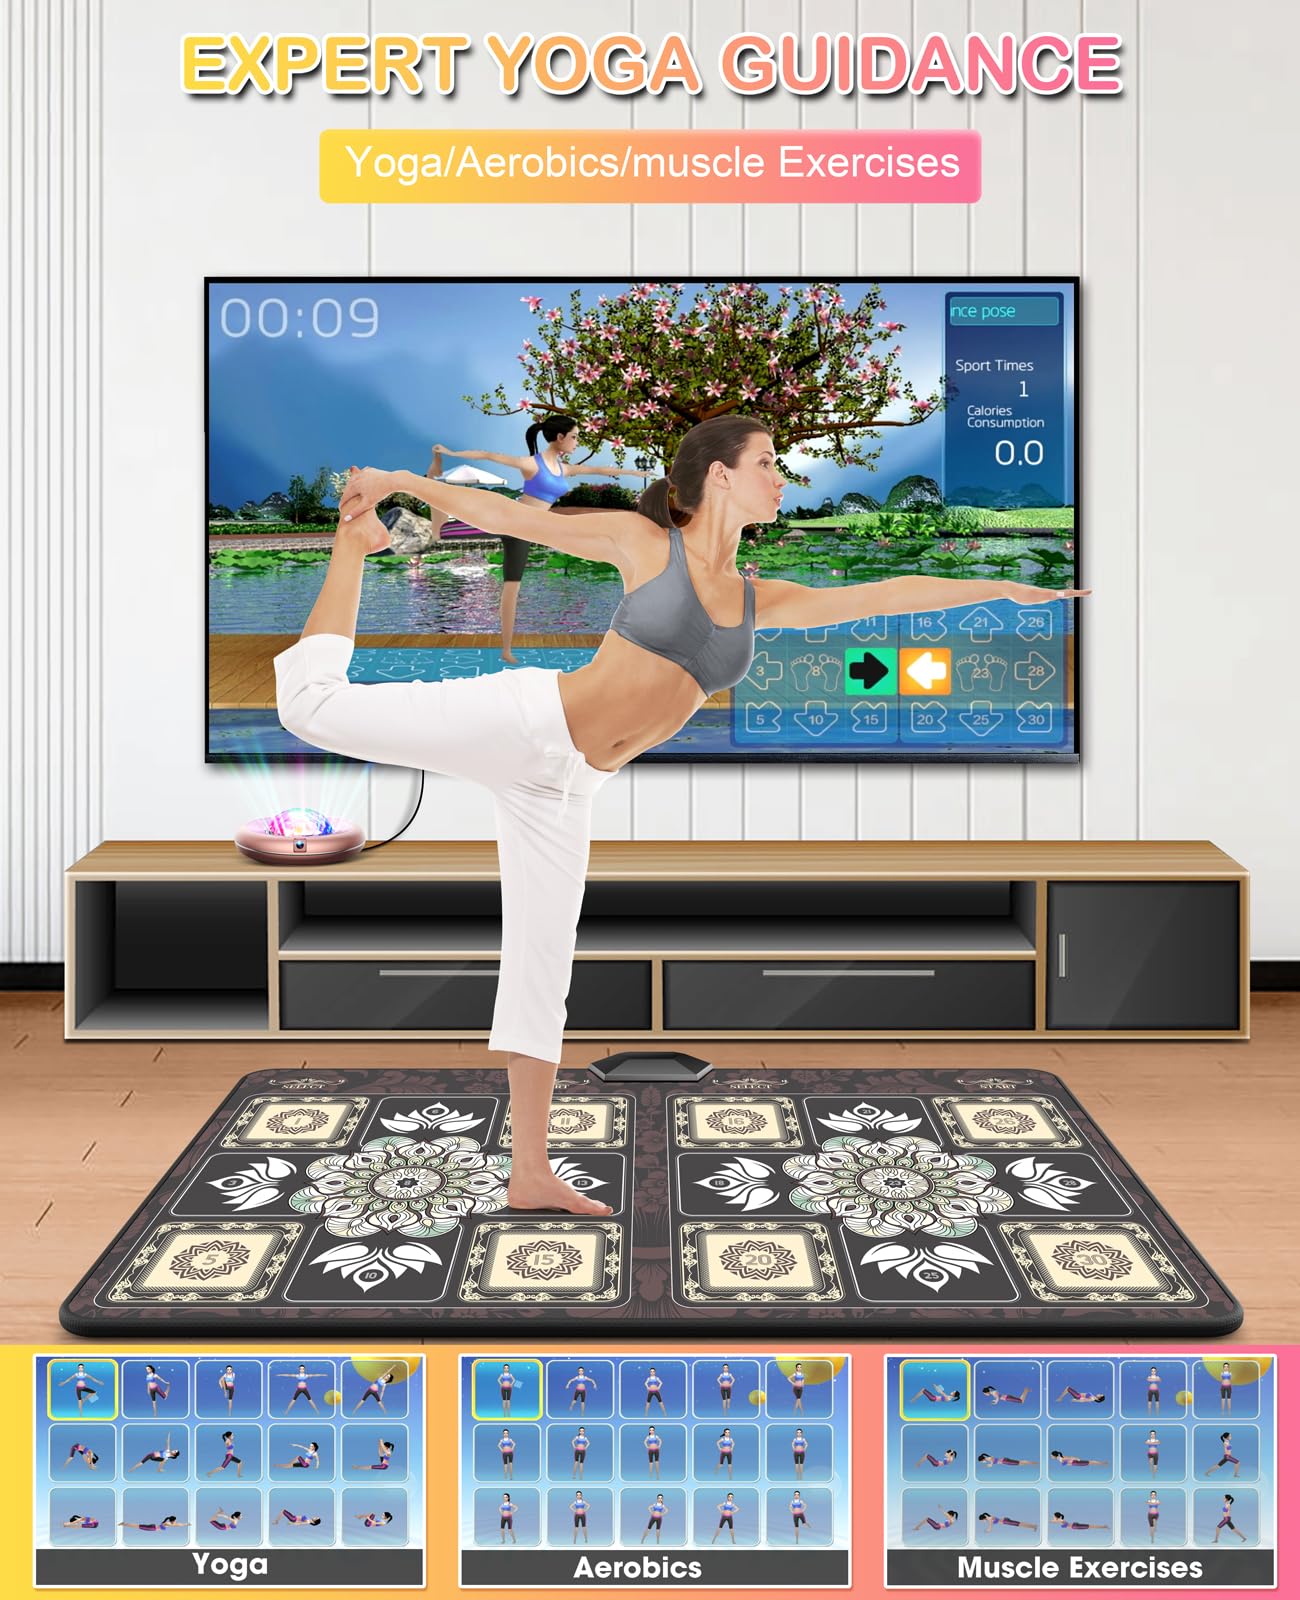 HAPHOM Two Colors Dance mats-Dance Game Soft Mat Toys Electronic Dance Mats for Kids and Adults Dance Pad Game for TV Gift Deas for Ages 4 5 6 7 8 9 10 11 12+ Year Old Boys & Girls